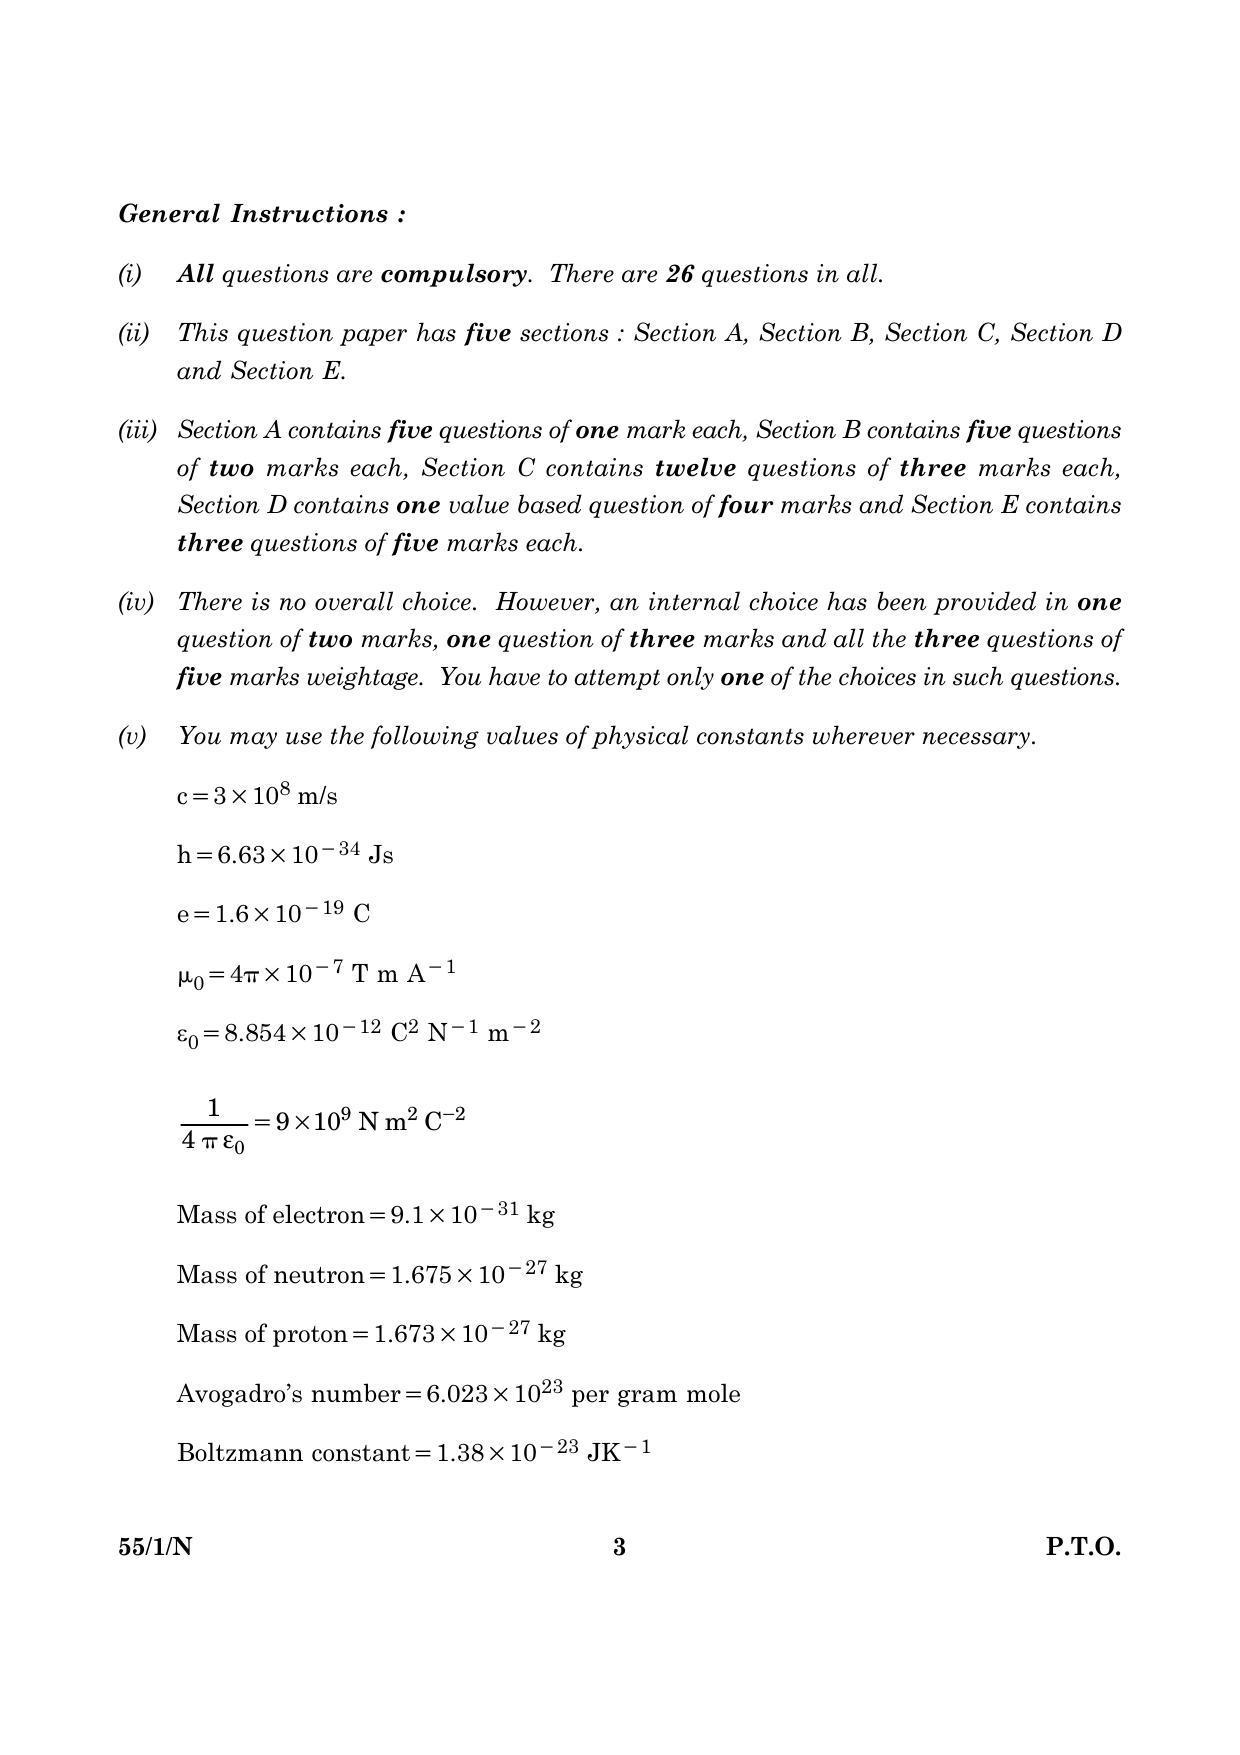 CBSE Class 12 055 Set 1 N Physics Theory 2016 Question Paper - Page 3